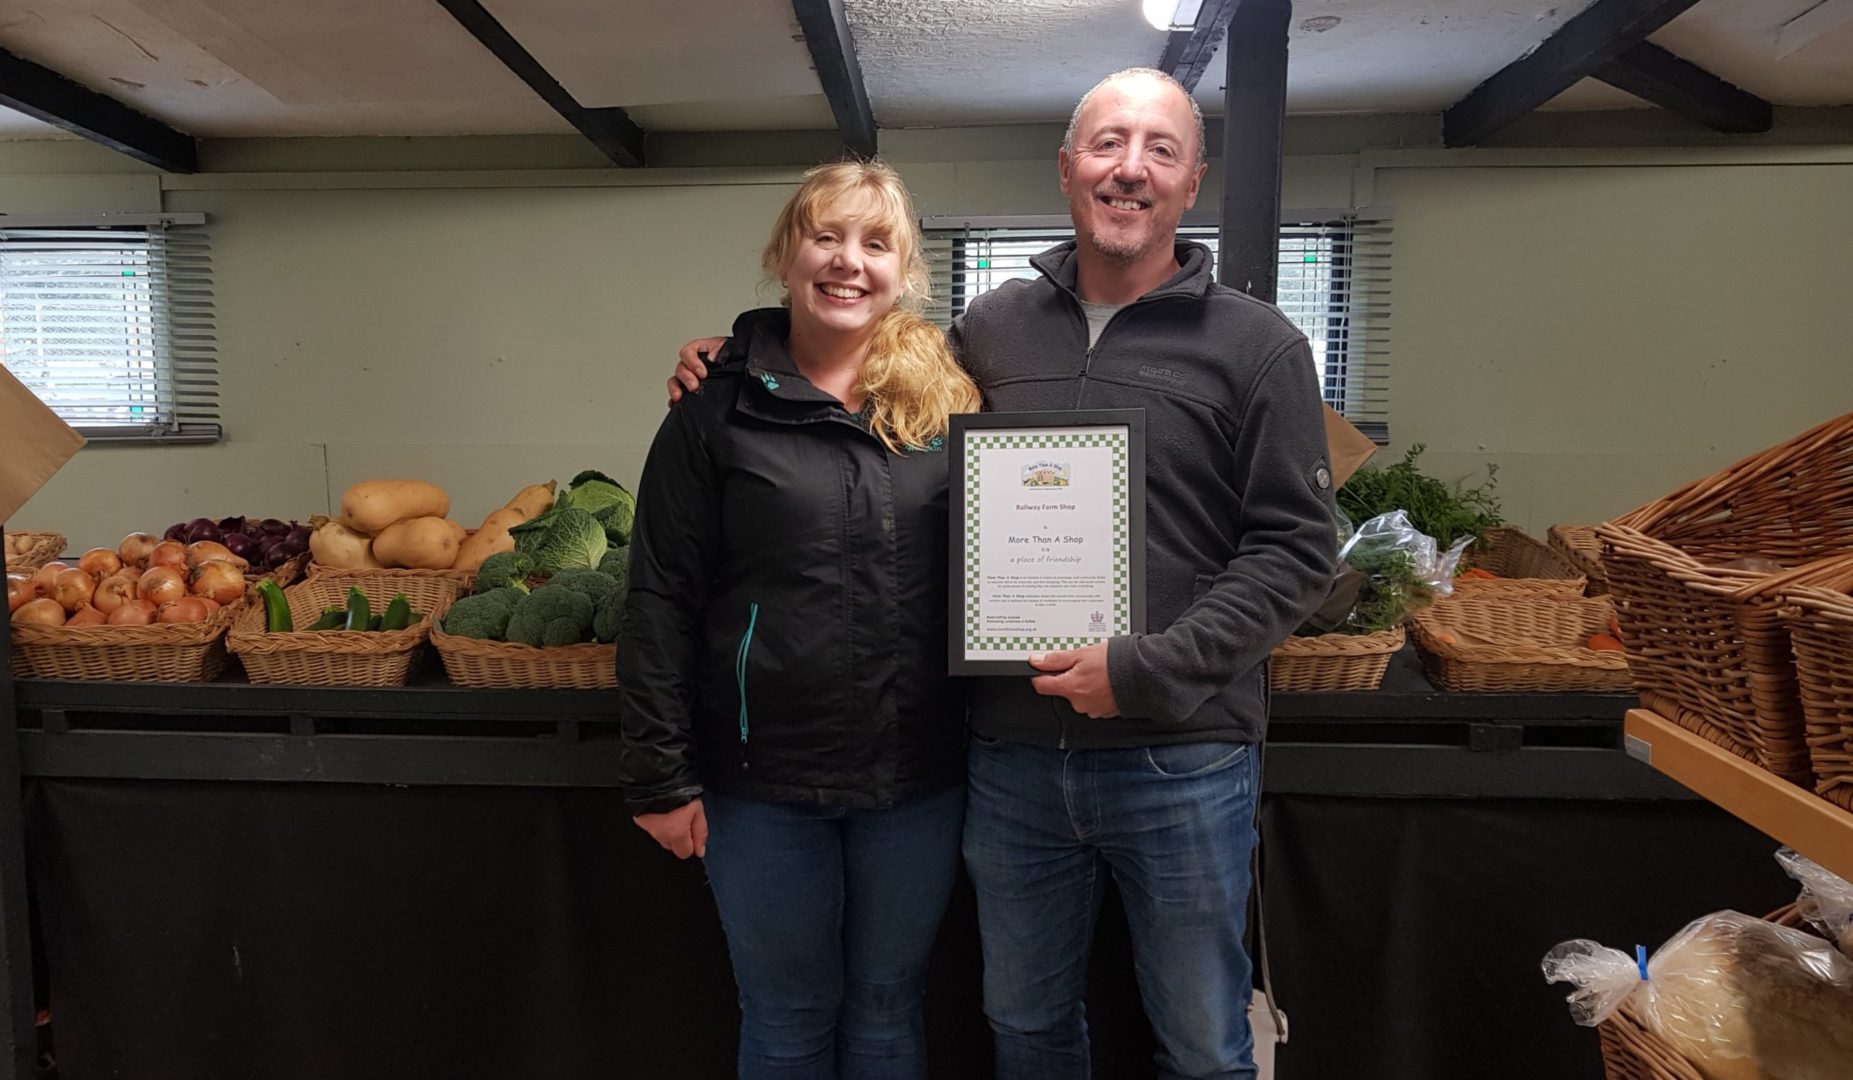 Railway Farm shop Kerry and Martin receiving their certificate